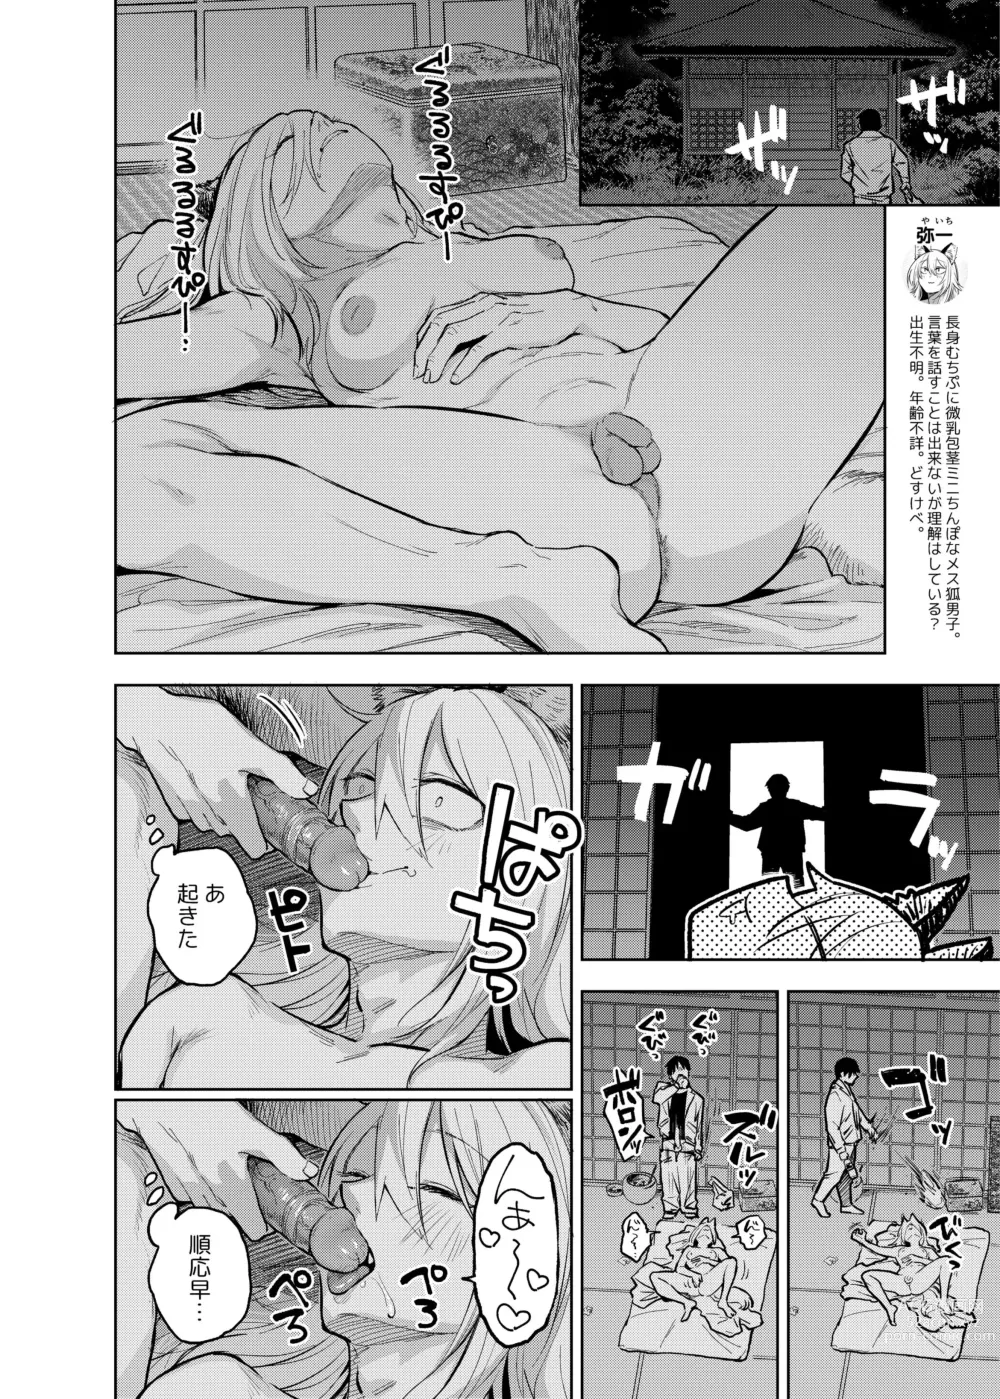 Page 2 of doujinshi Lets fuck a bitchy, meth-addicted fox boy for the tenth straight night of work.